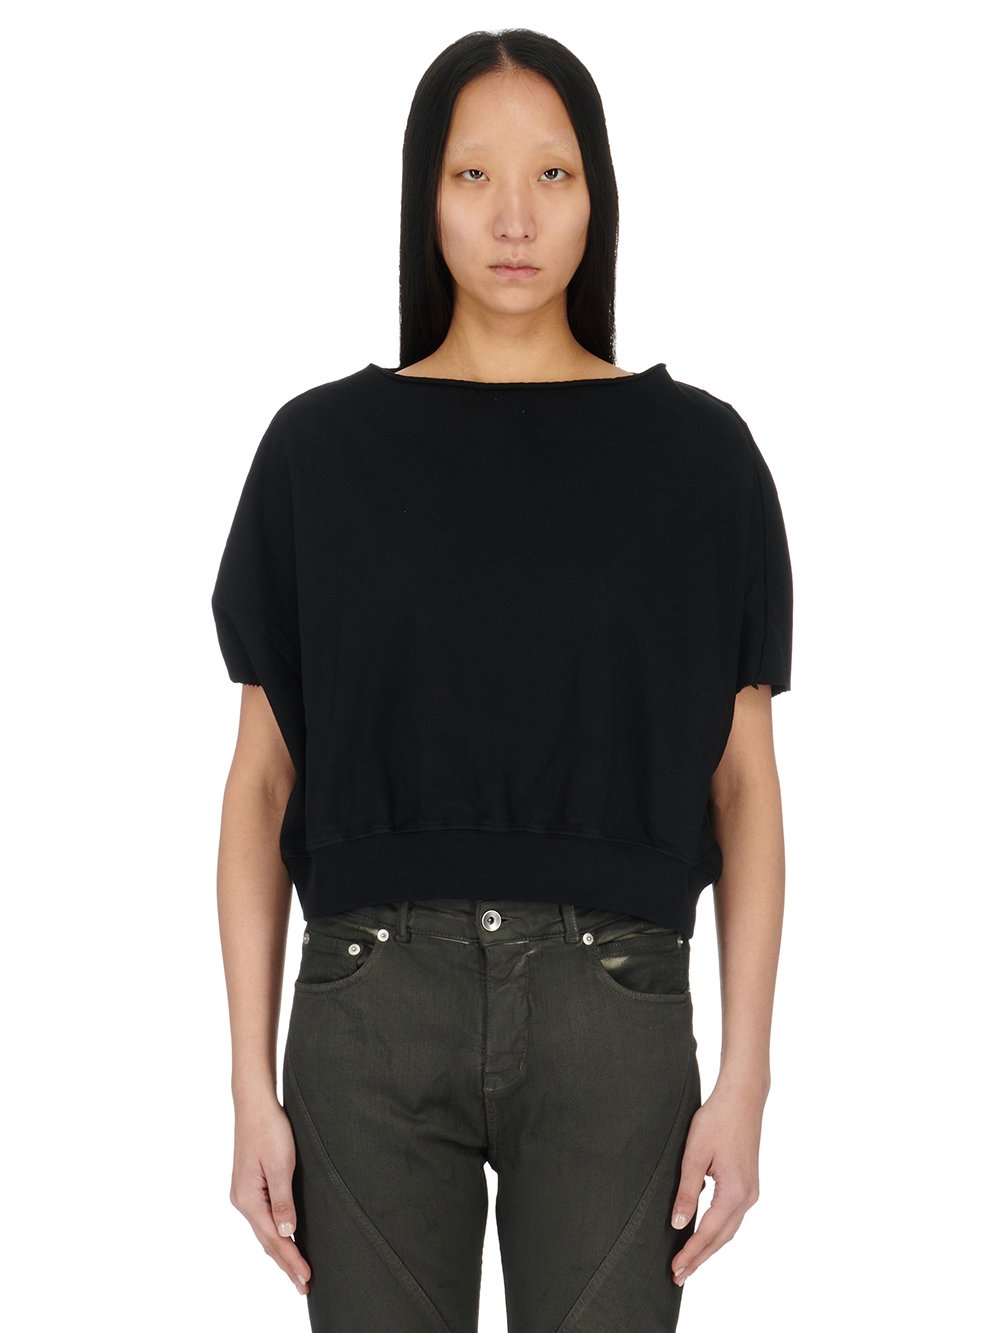 RICK OWENS FW23 LUXOR DAGGER TOP IN BLACK COMPACT HEAVY COTTON JERSEY